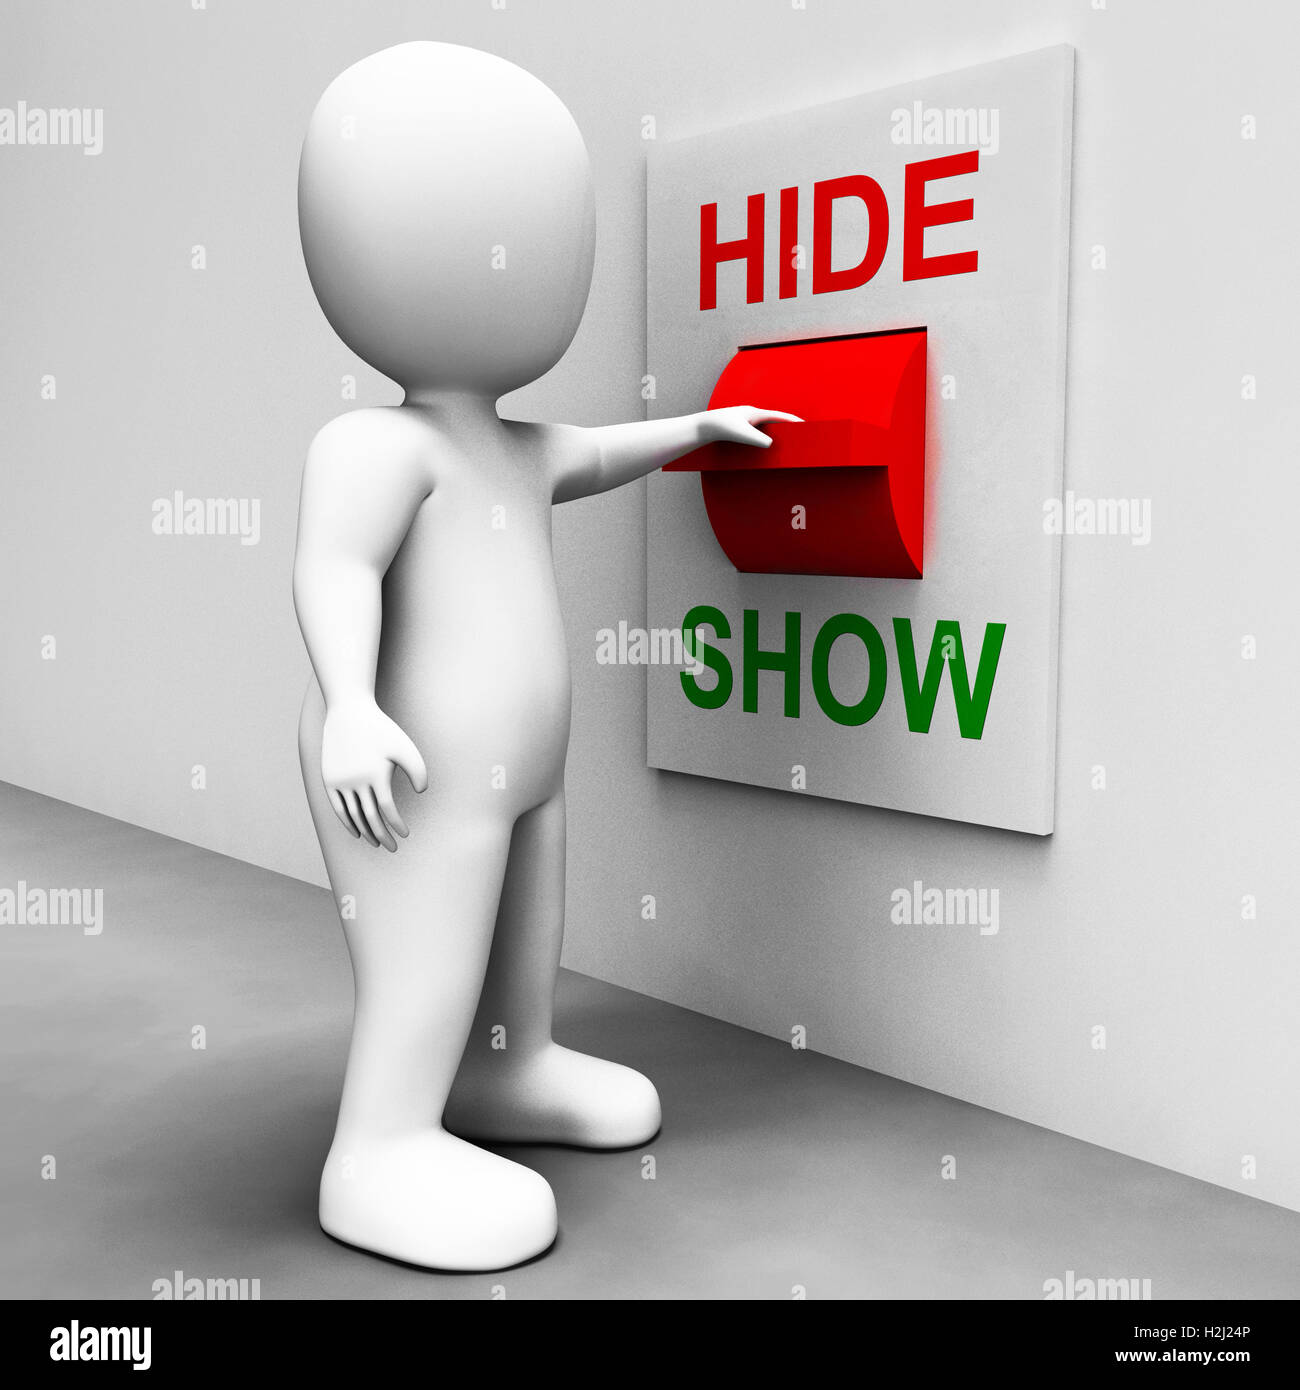 Show Hide Switch Means Conceal or Reveal Stock Photo